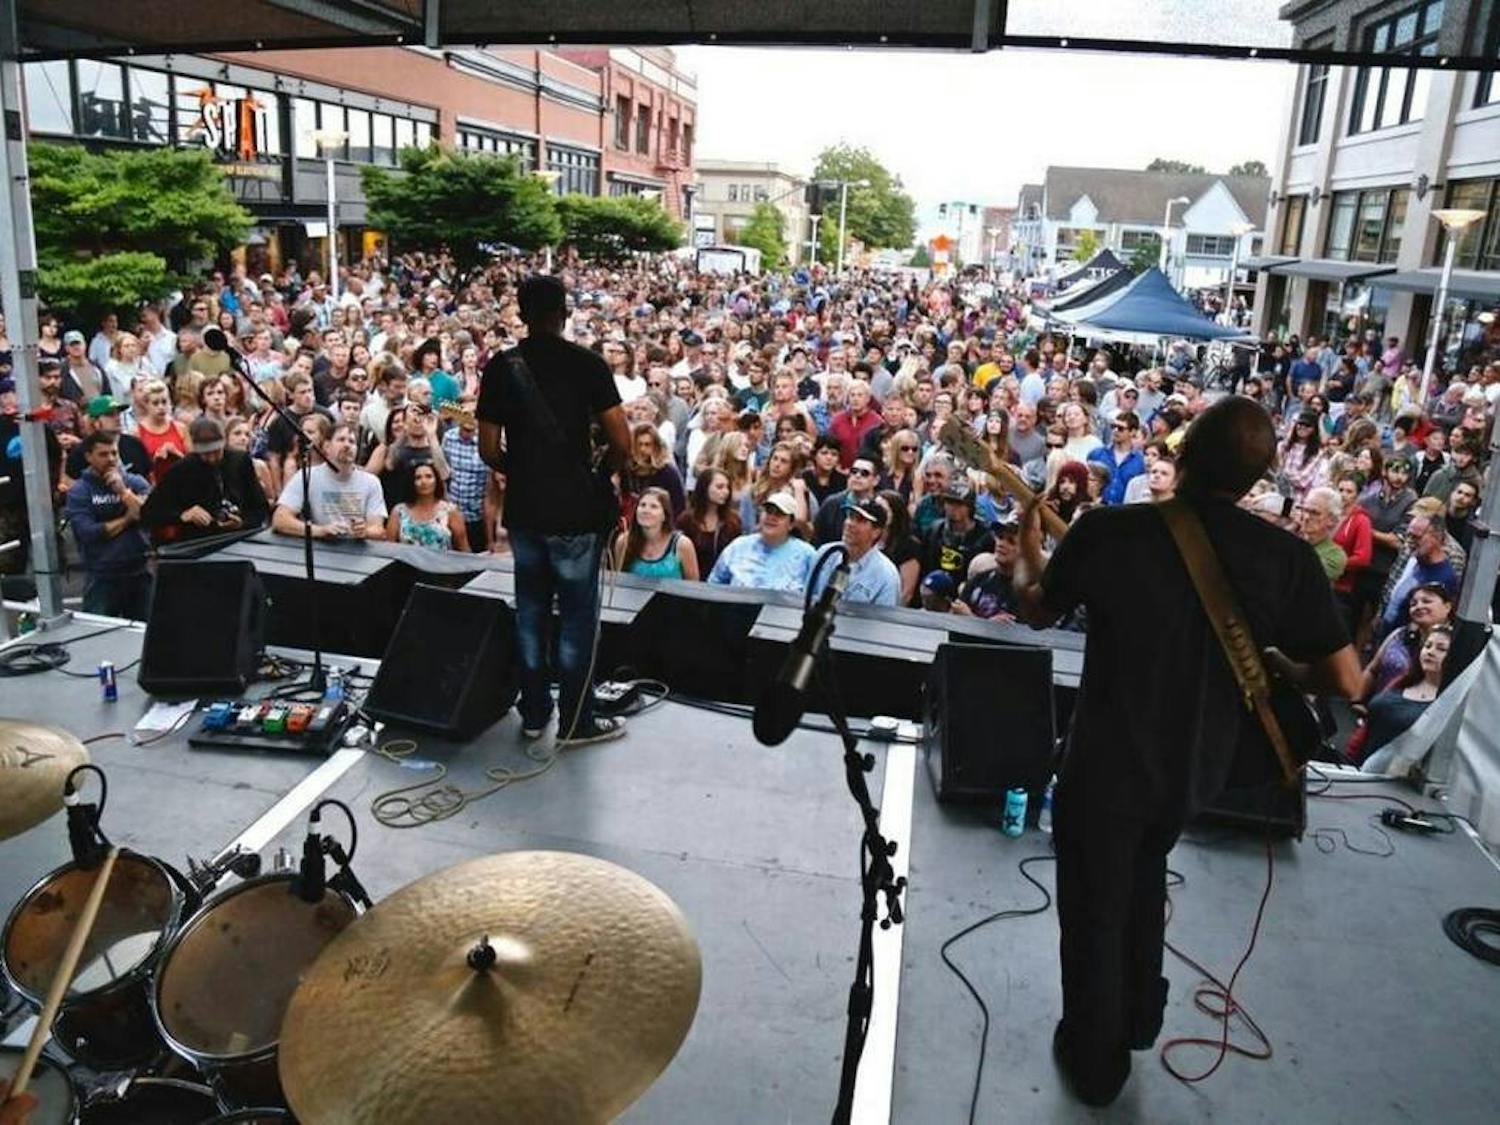 (1) Fairhaven Festival closes the town for a day of celebration